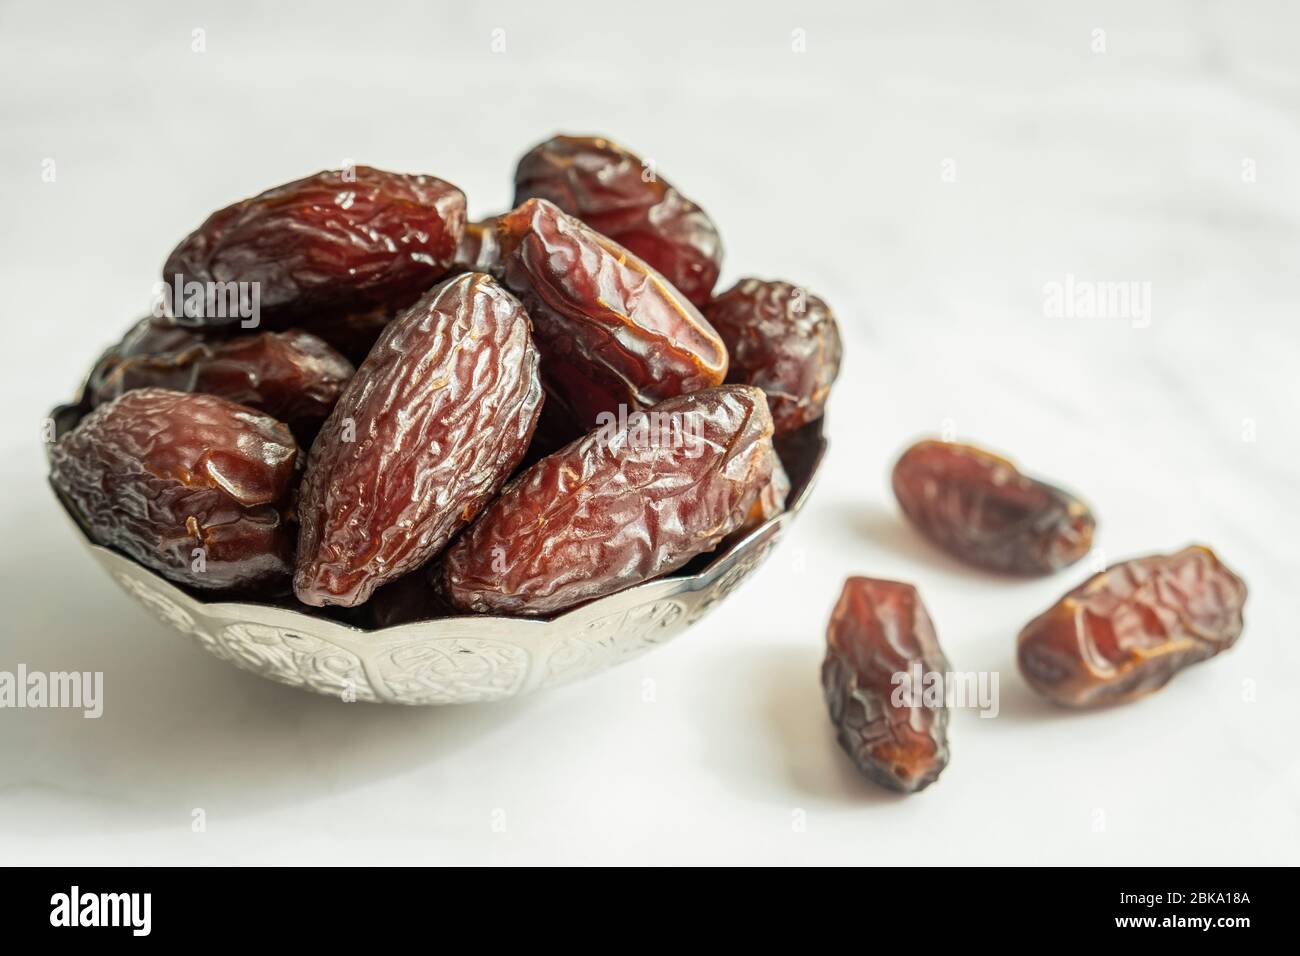 Raw date fruit ready to eat in silver bowl on a white marble background. Traditional, delicious and healthy ramadan food. Stock Photo